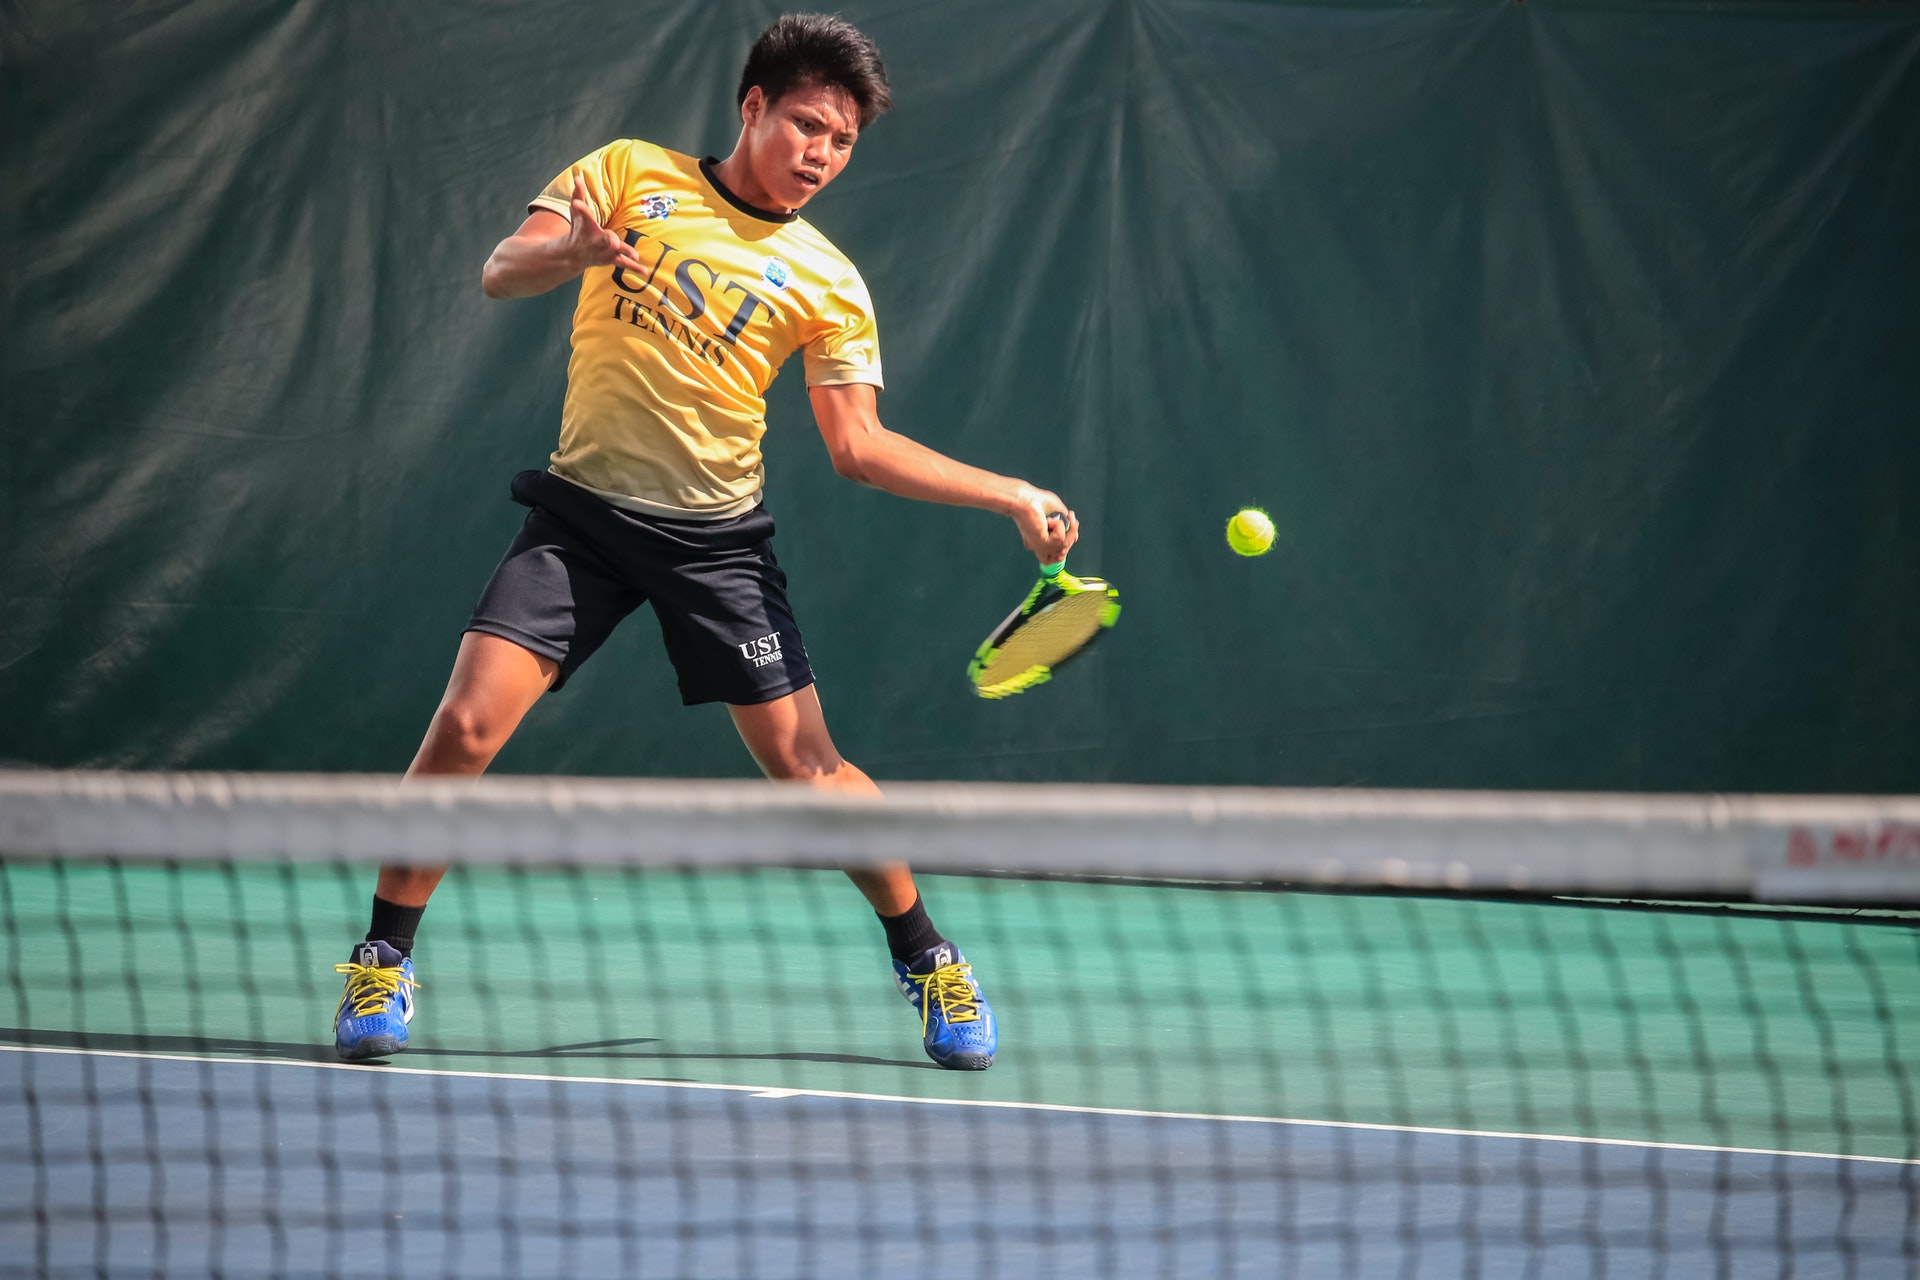 player hitting tennis ball back in motion